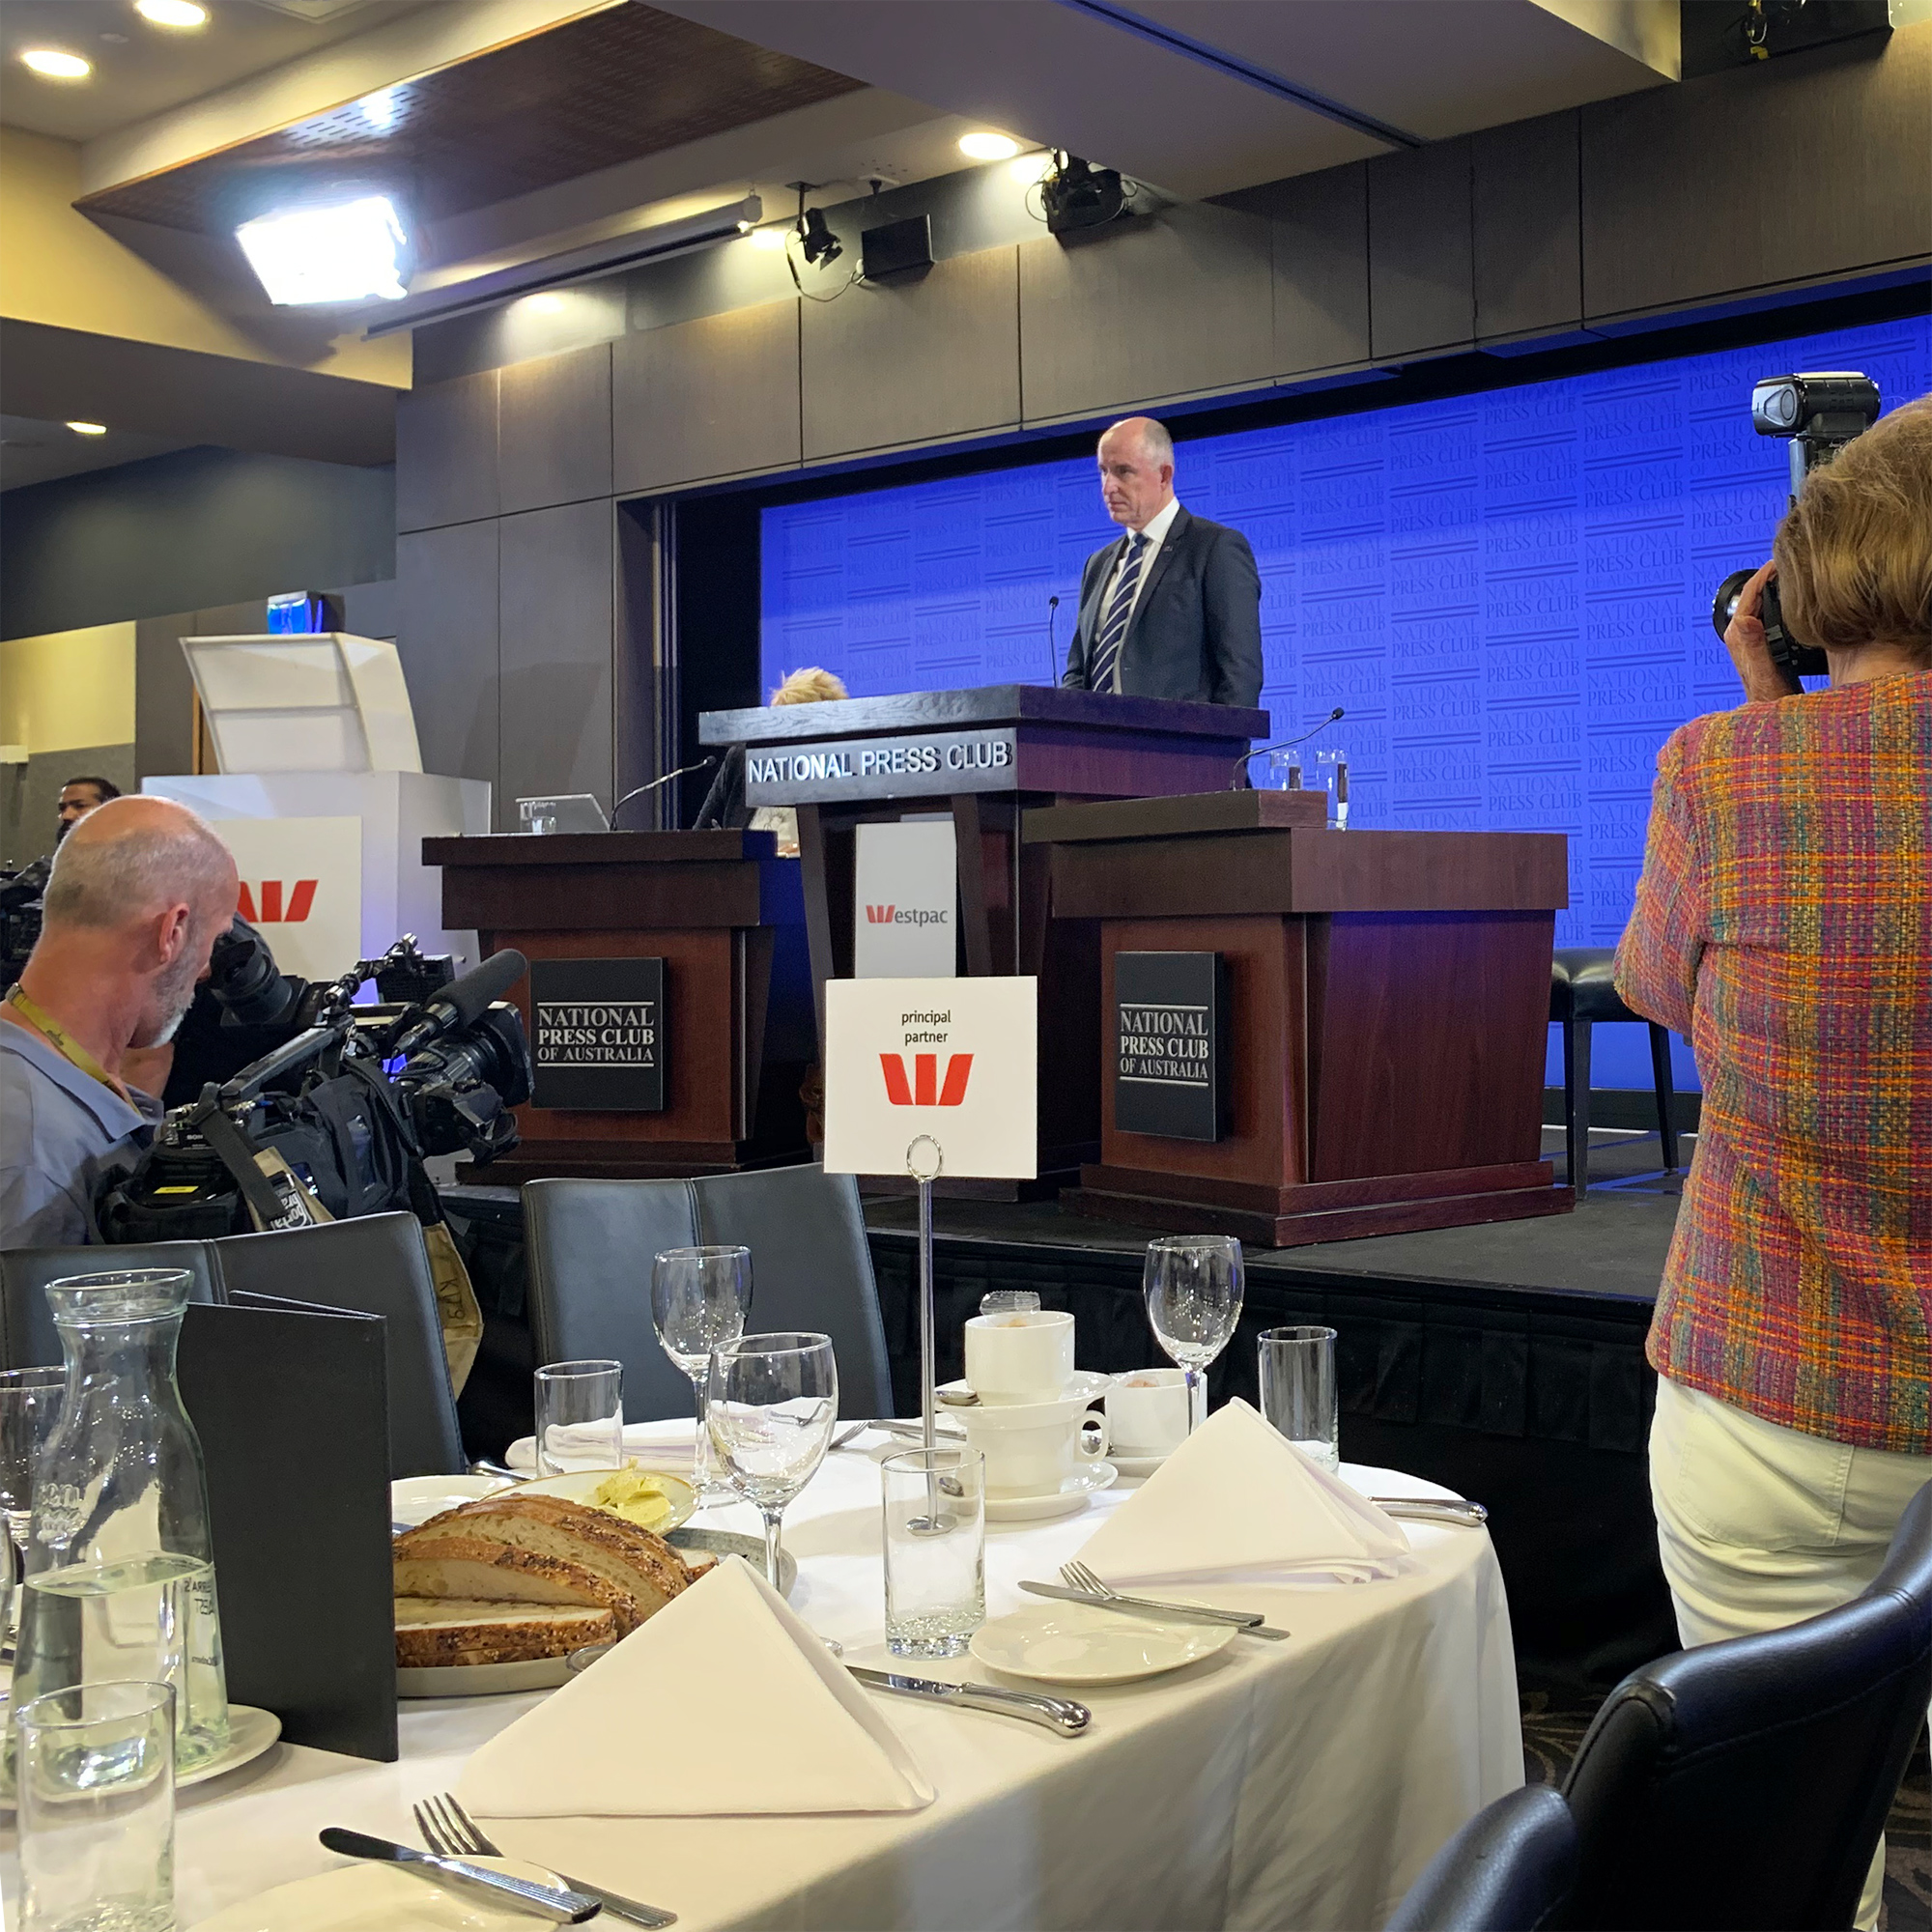 Photo of Minister for the NDIS Stuart Robert MP, standing behind the National Press Club podium on a stage in the middle. In the foreground is a table with plates, glasses, cutlery and bread. There is a cameraman recording on the left, and a photographer on the right.